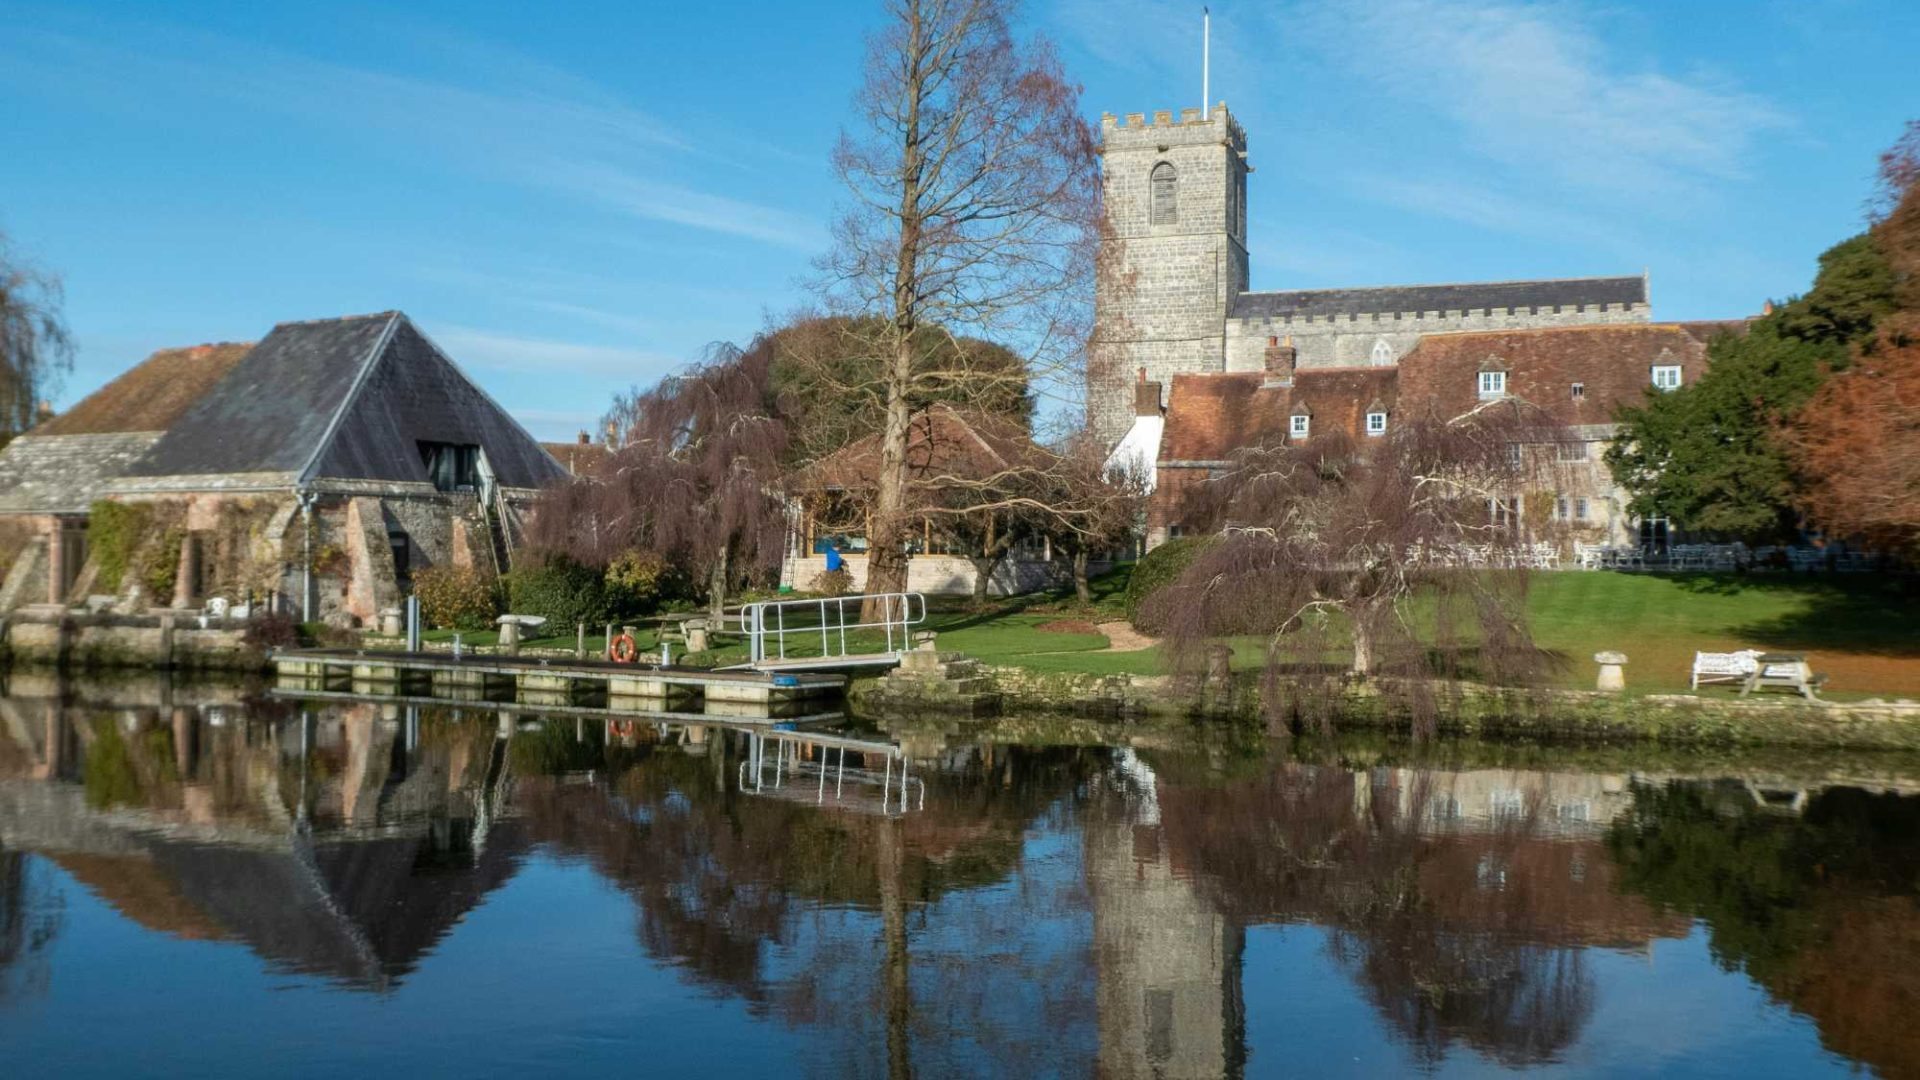 A picture of Wareham church taken by the river